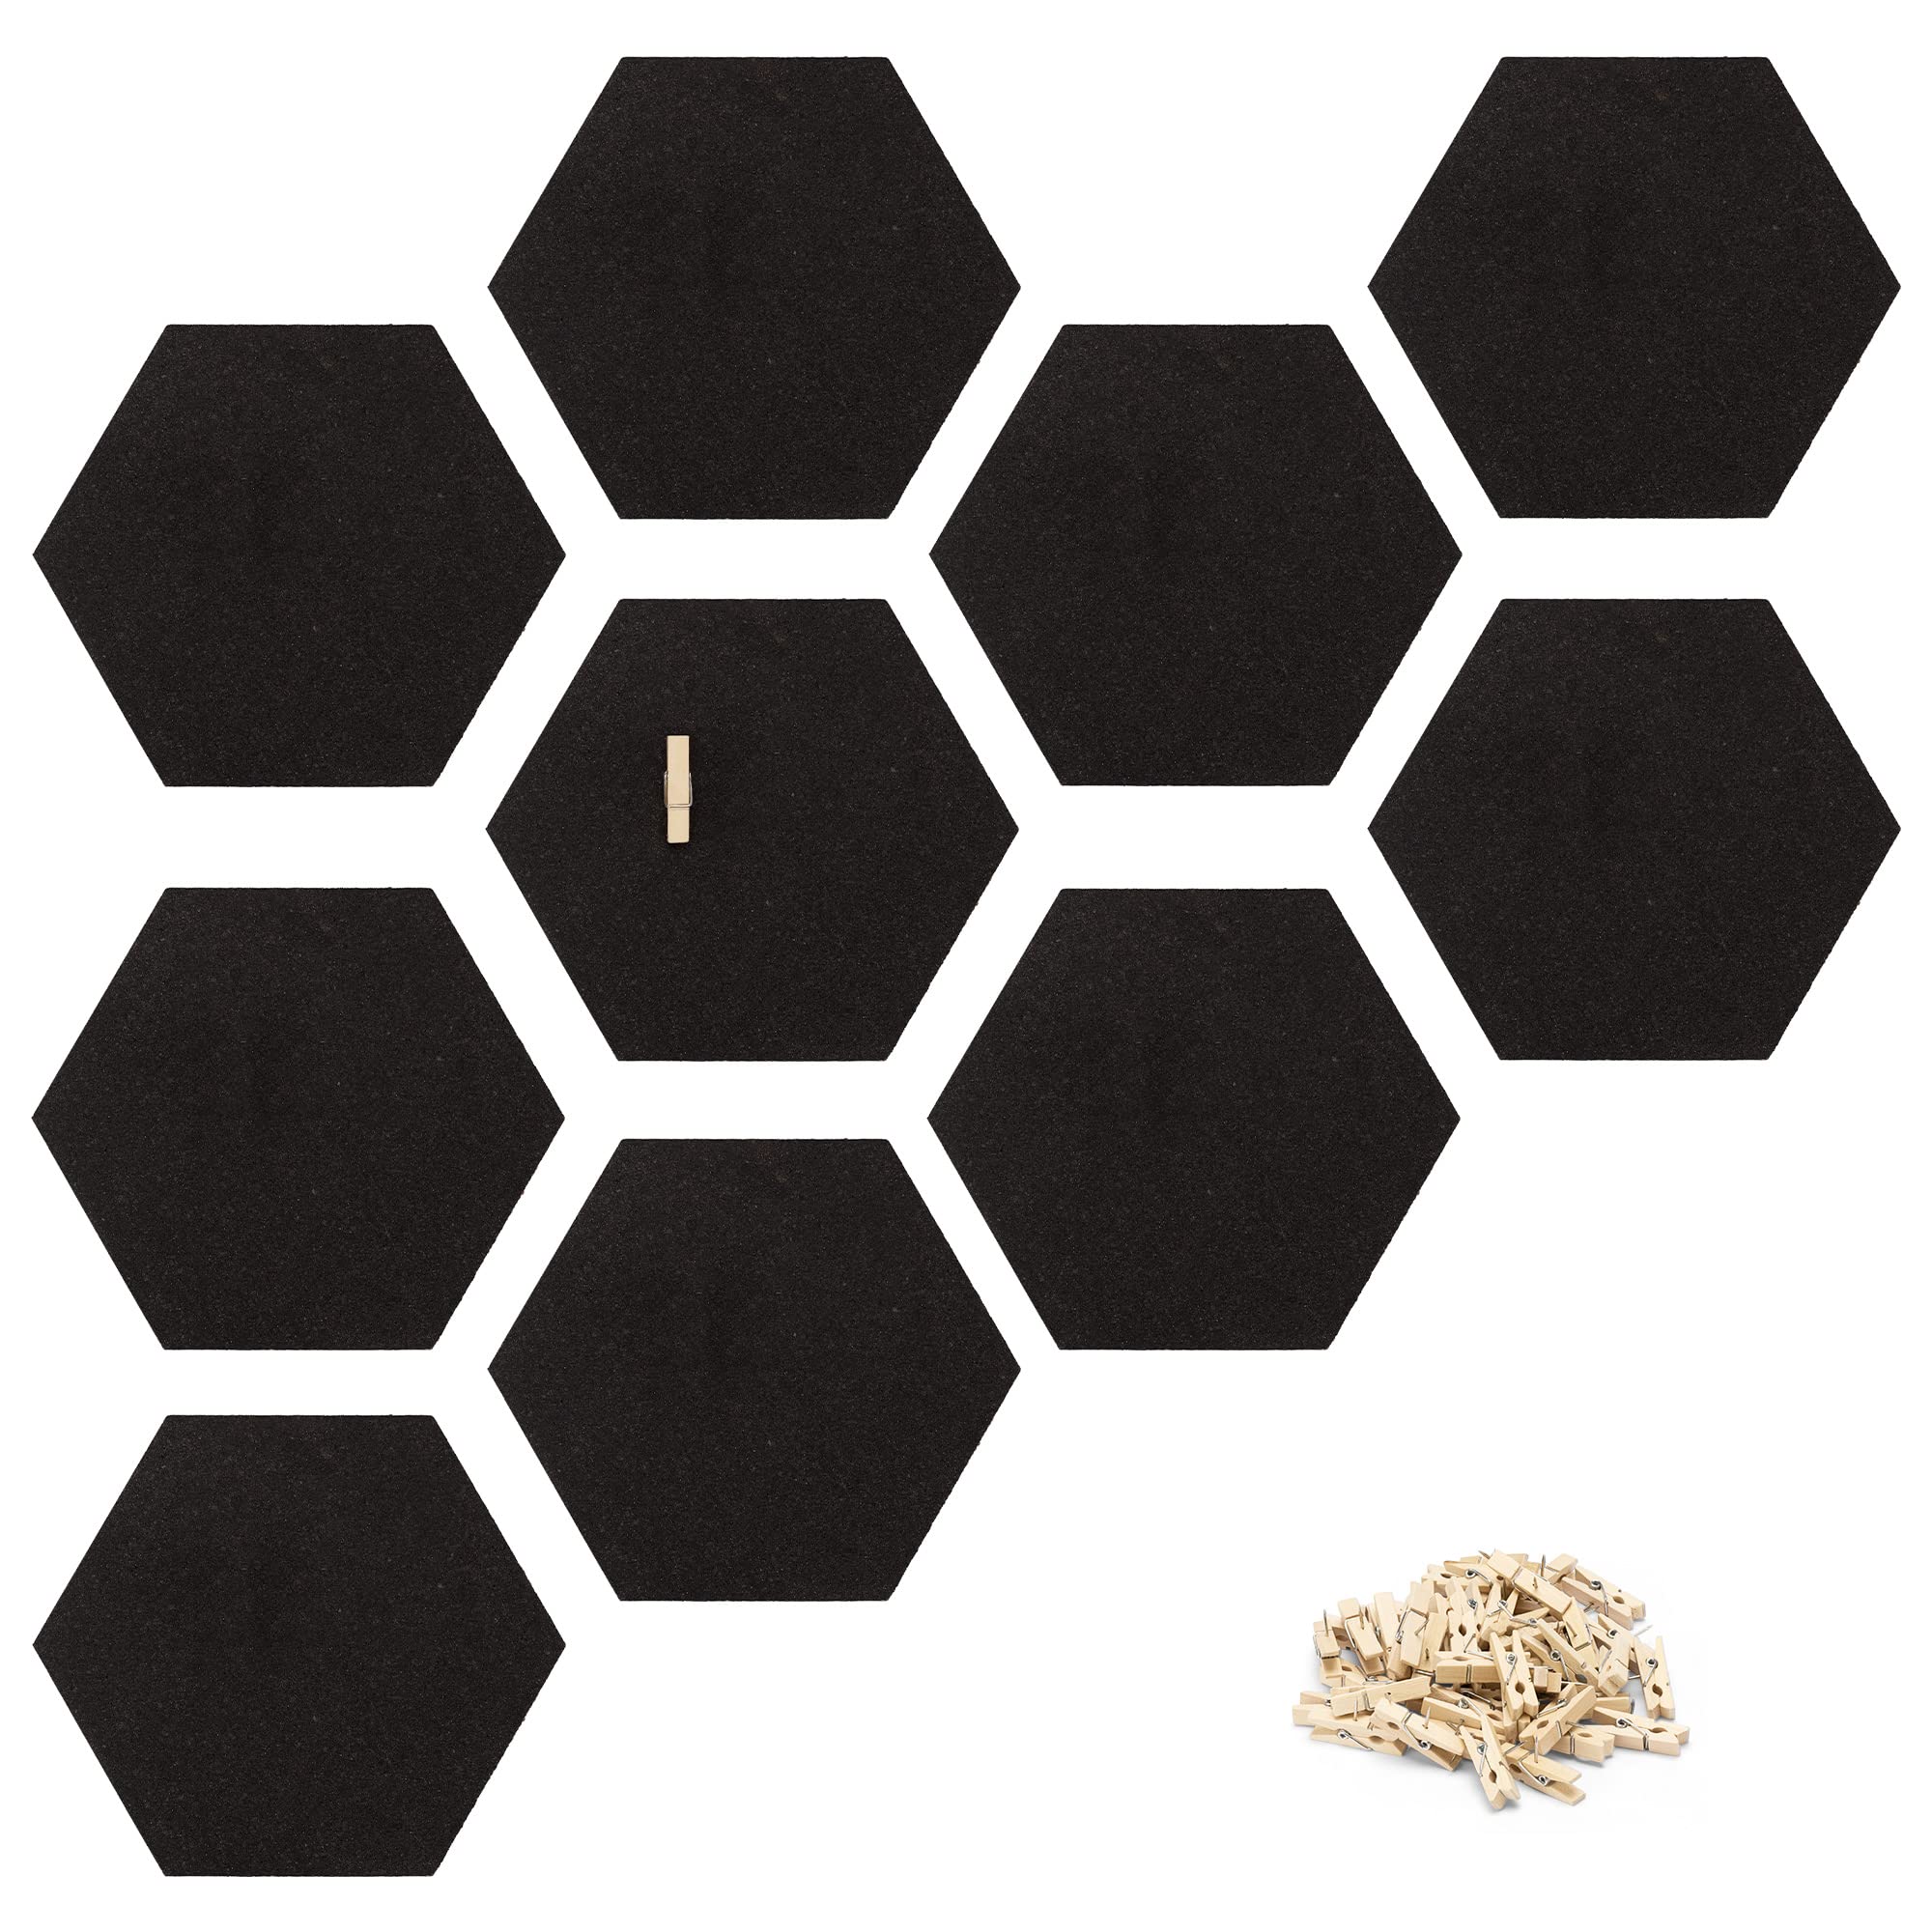 Navaris Hexagon Cork Board Tiles (Set of 10) - Self Adhesive Cork Board Tiles for Walls 5/8 inch Thick - Includes 50 Wood Push P